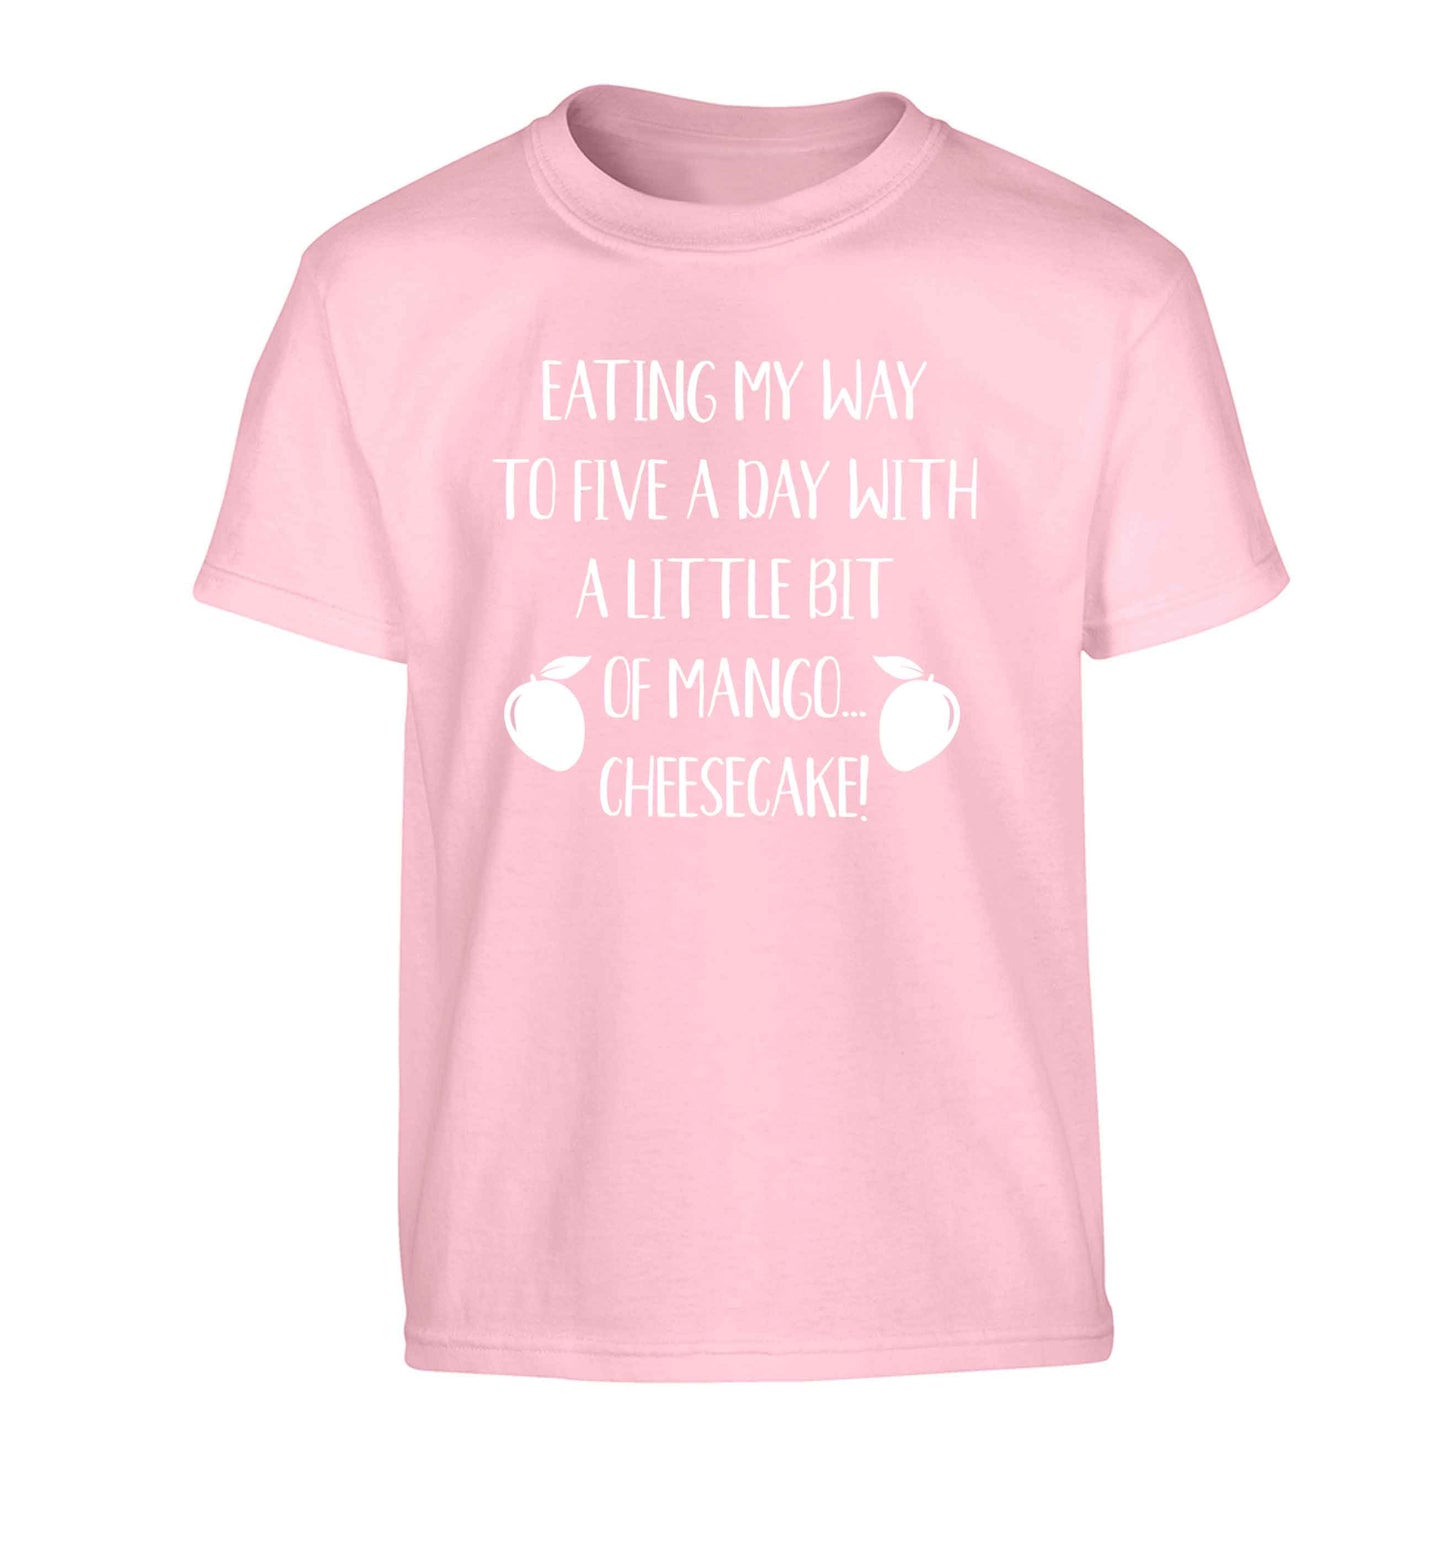 Eating my way to five a day with a little bit of mango cheesecake Children's light pink Tshirt 12-13 Years